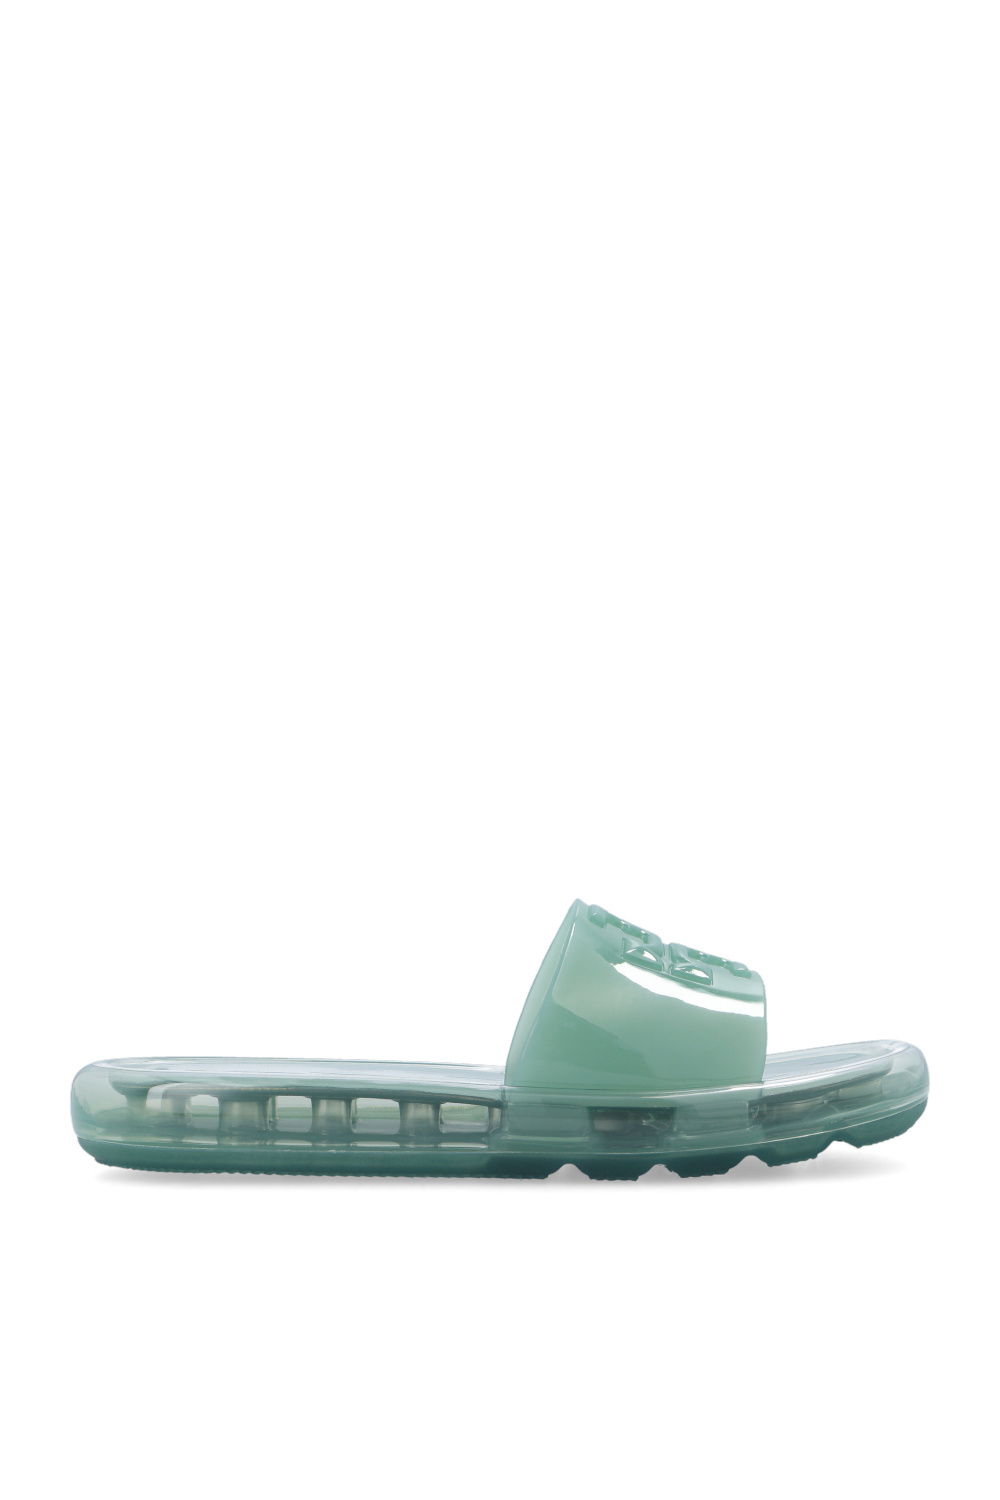 IetpShops Spain - dior spring summer 2021 mens sandals monogram rope closer  look thibo denis - 'Bubble Jelly' slides with logo Tory Burch